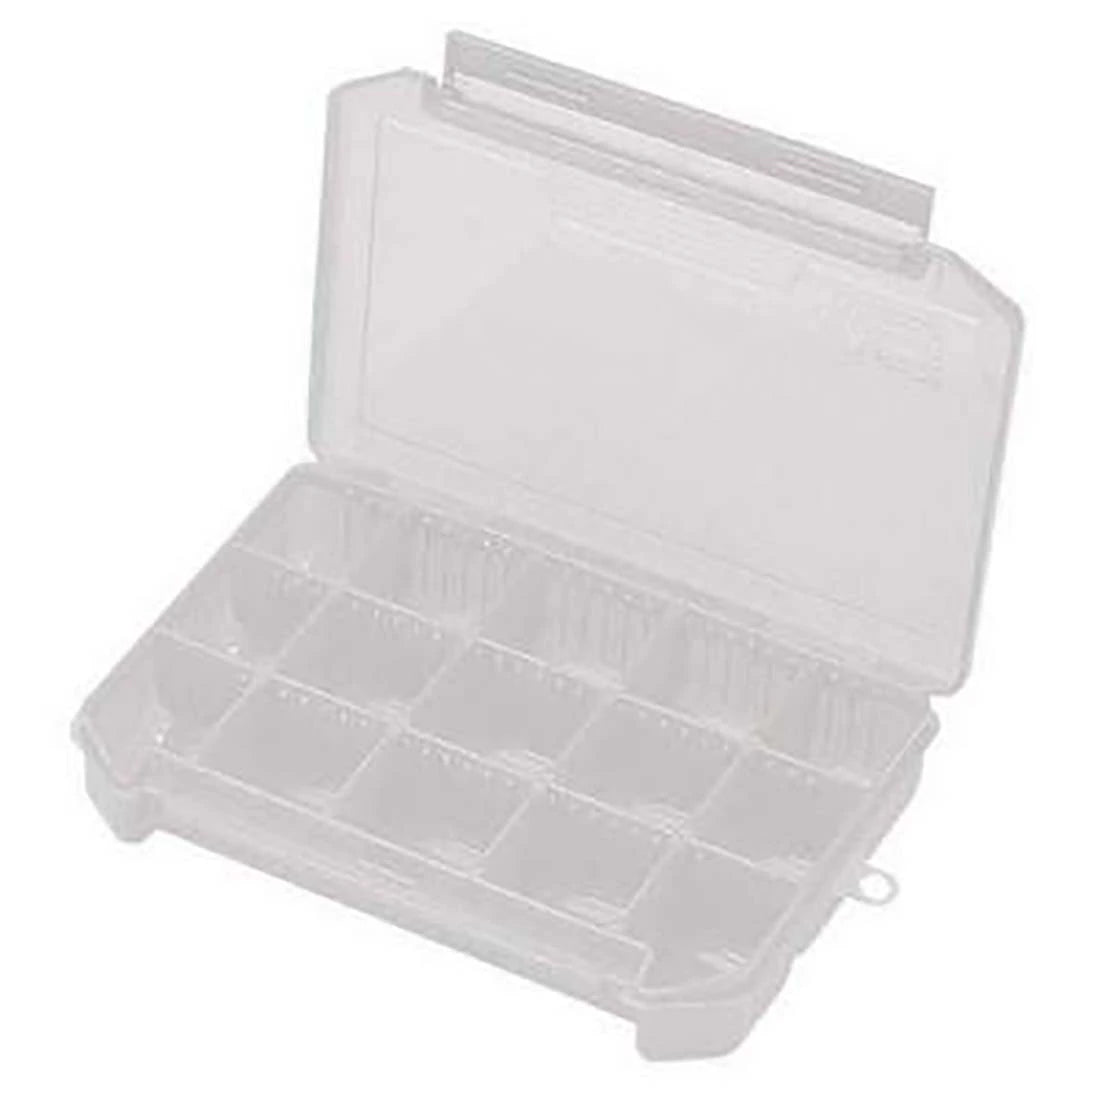 Versus VS-3010ND Tackle Box-Tackle Boxes & Bags-Versus-Clear-Fishing Station